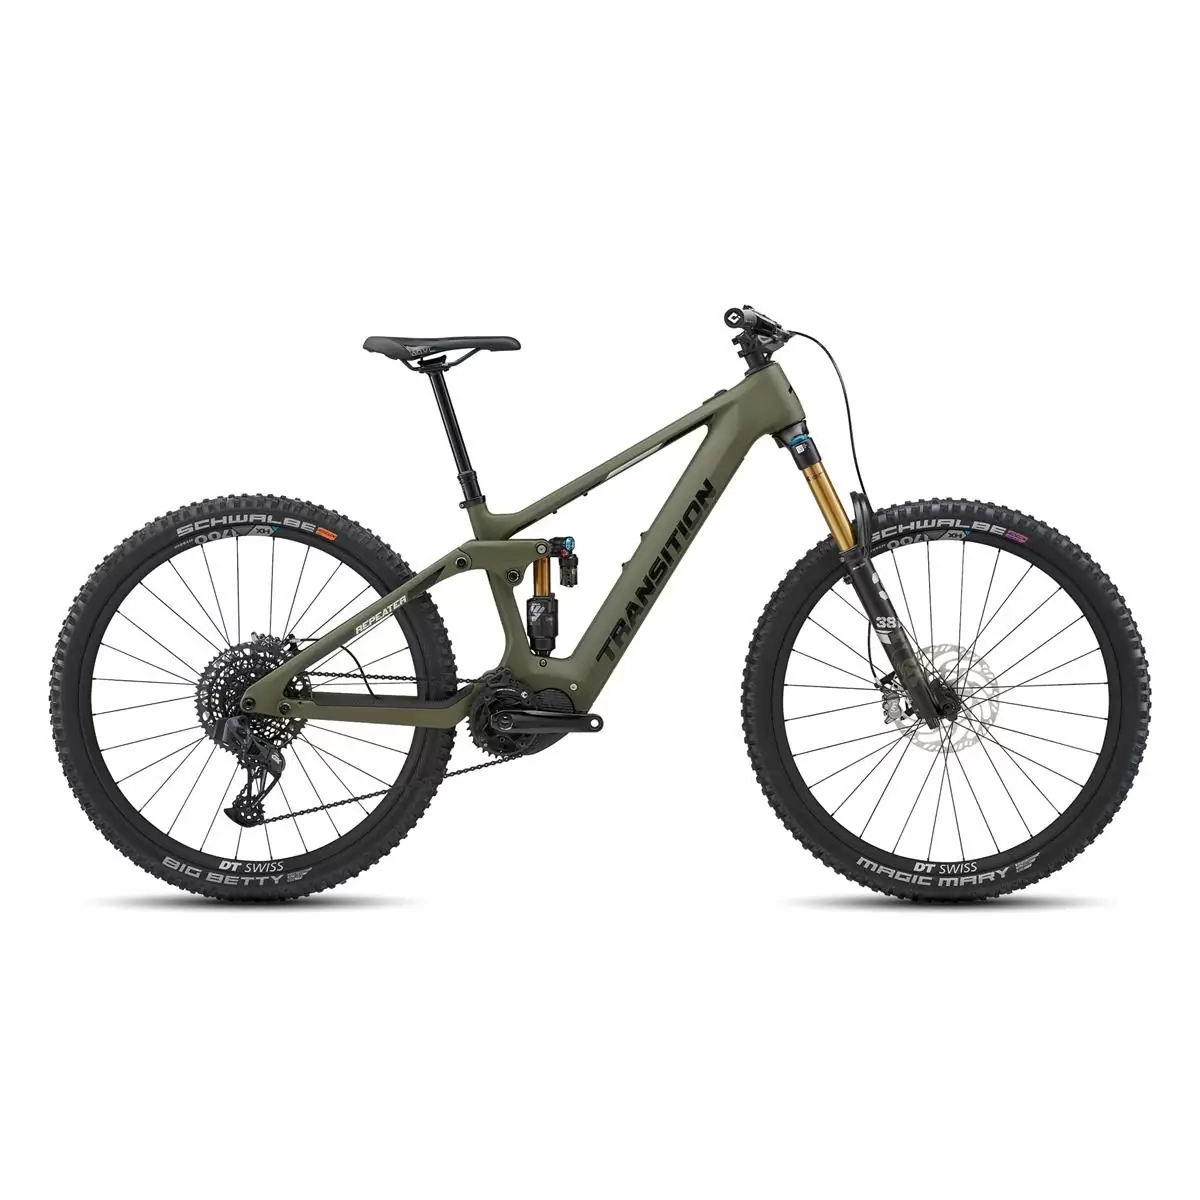 Repeater Carbon AXS 29'' 160mm 12v 630Wh Shimano EP8 Mossy Green Taglia L - image